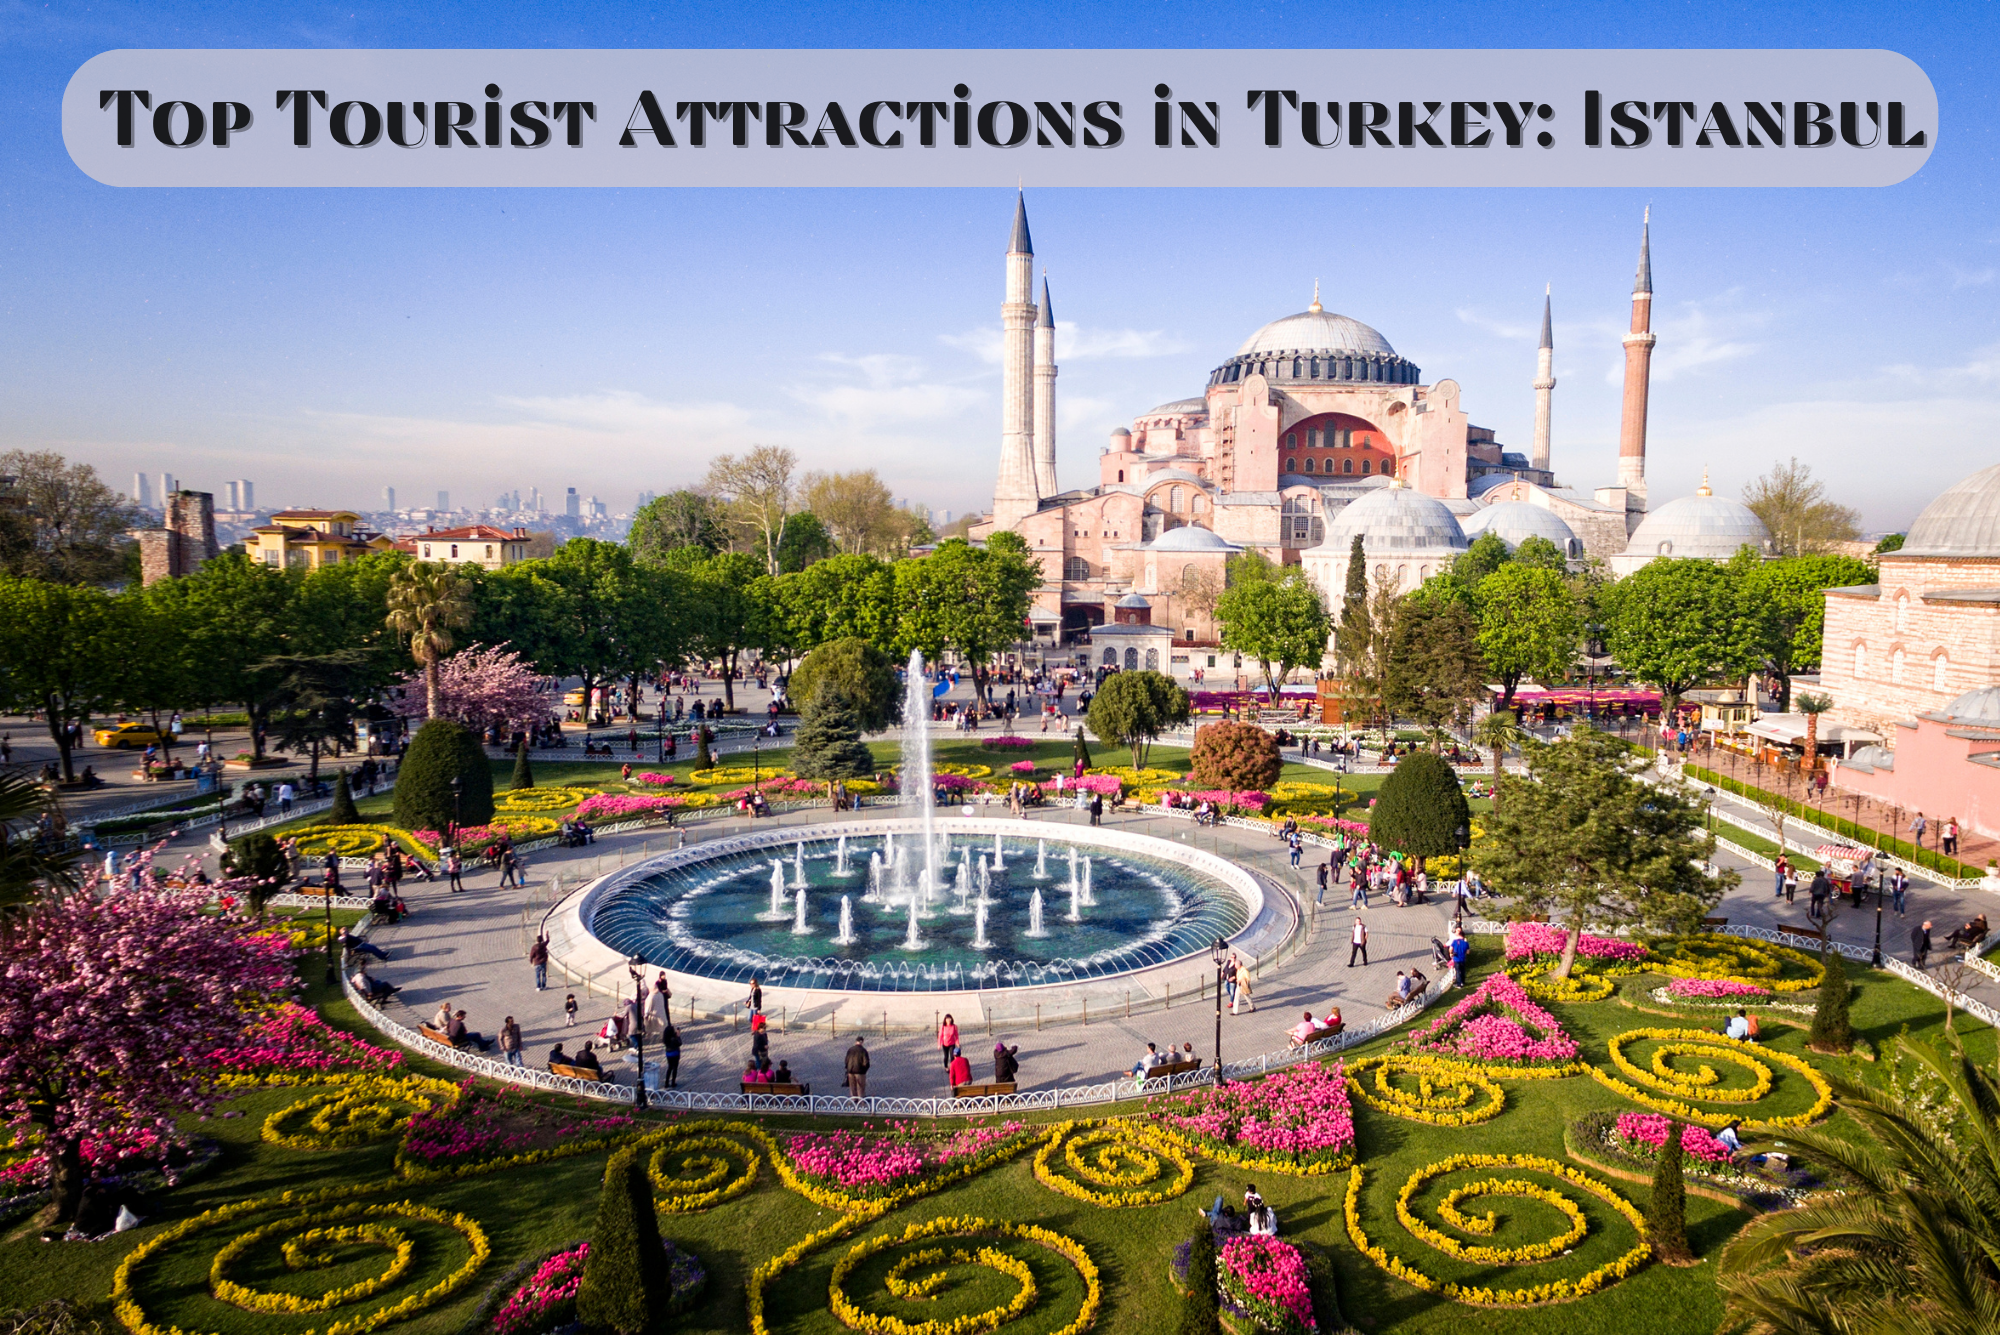 A vibrant scene at a top tourist attraction in Turkey, Istanbul, showcasing the captivating sights and colors of this enchanting destination.